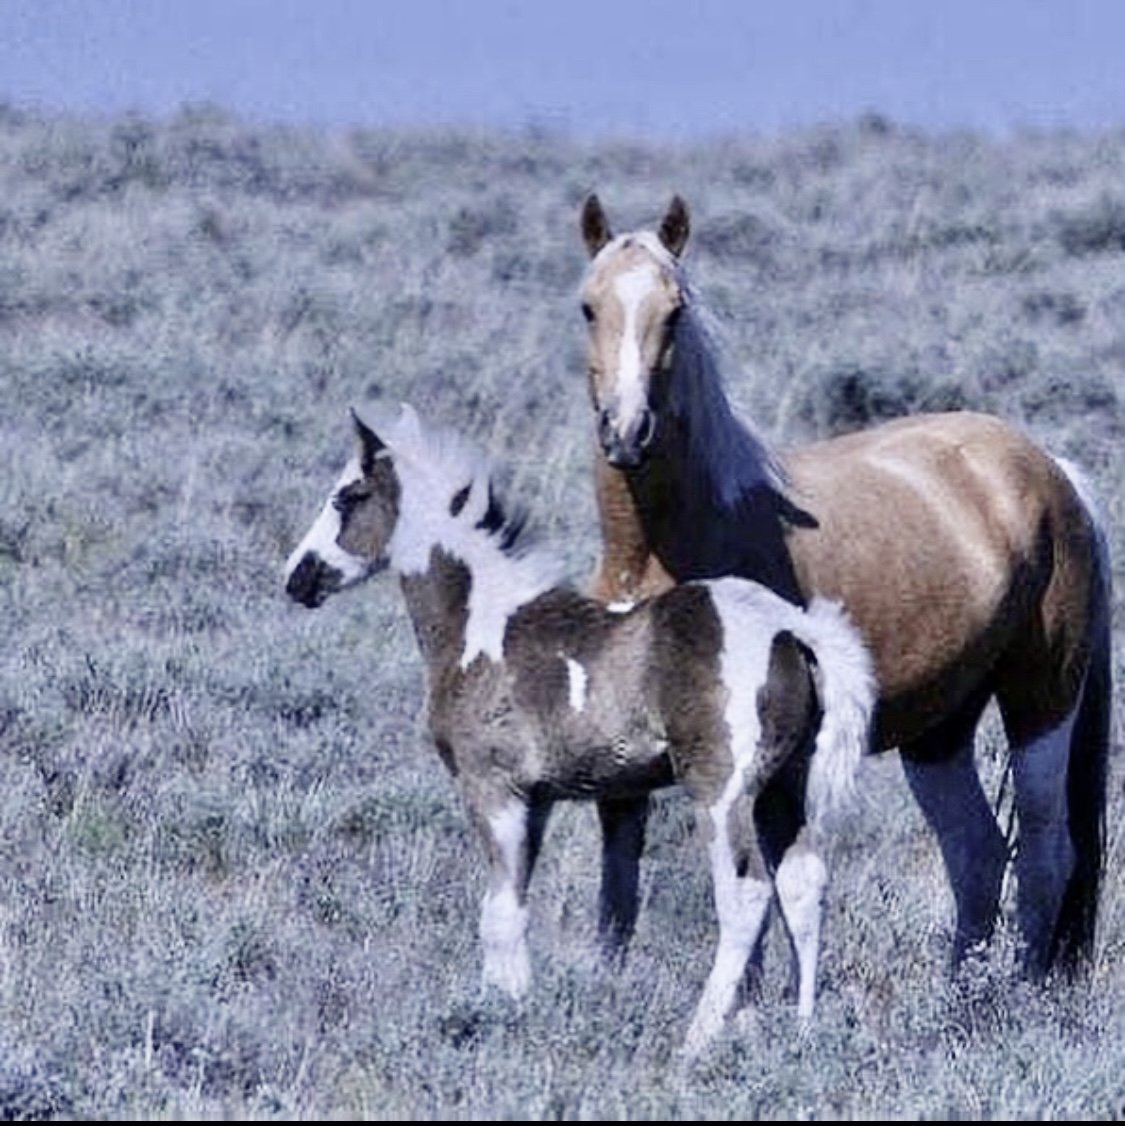  Calypso with her foal, Renegade 